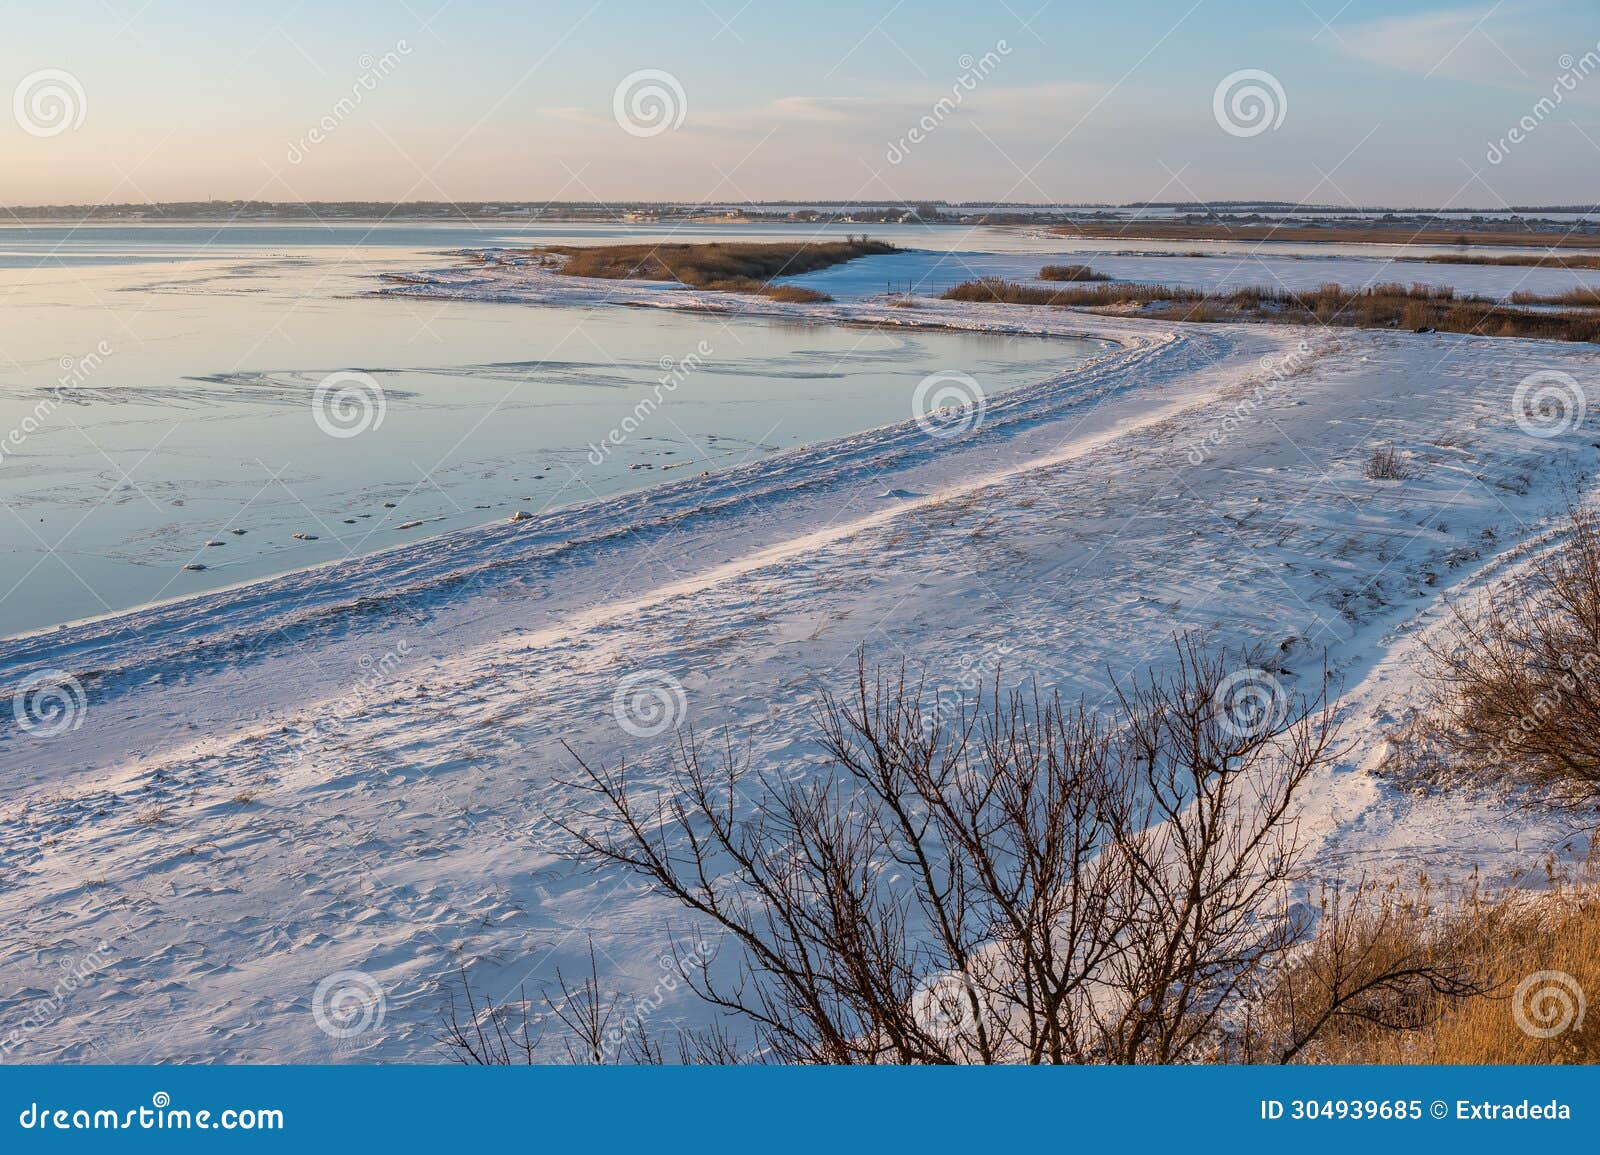 a spectacular winter landscape in the russian countryside with waterfront. surroundings of taganrog